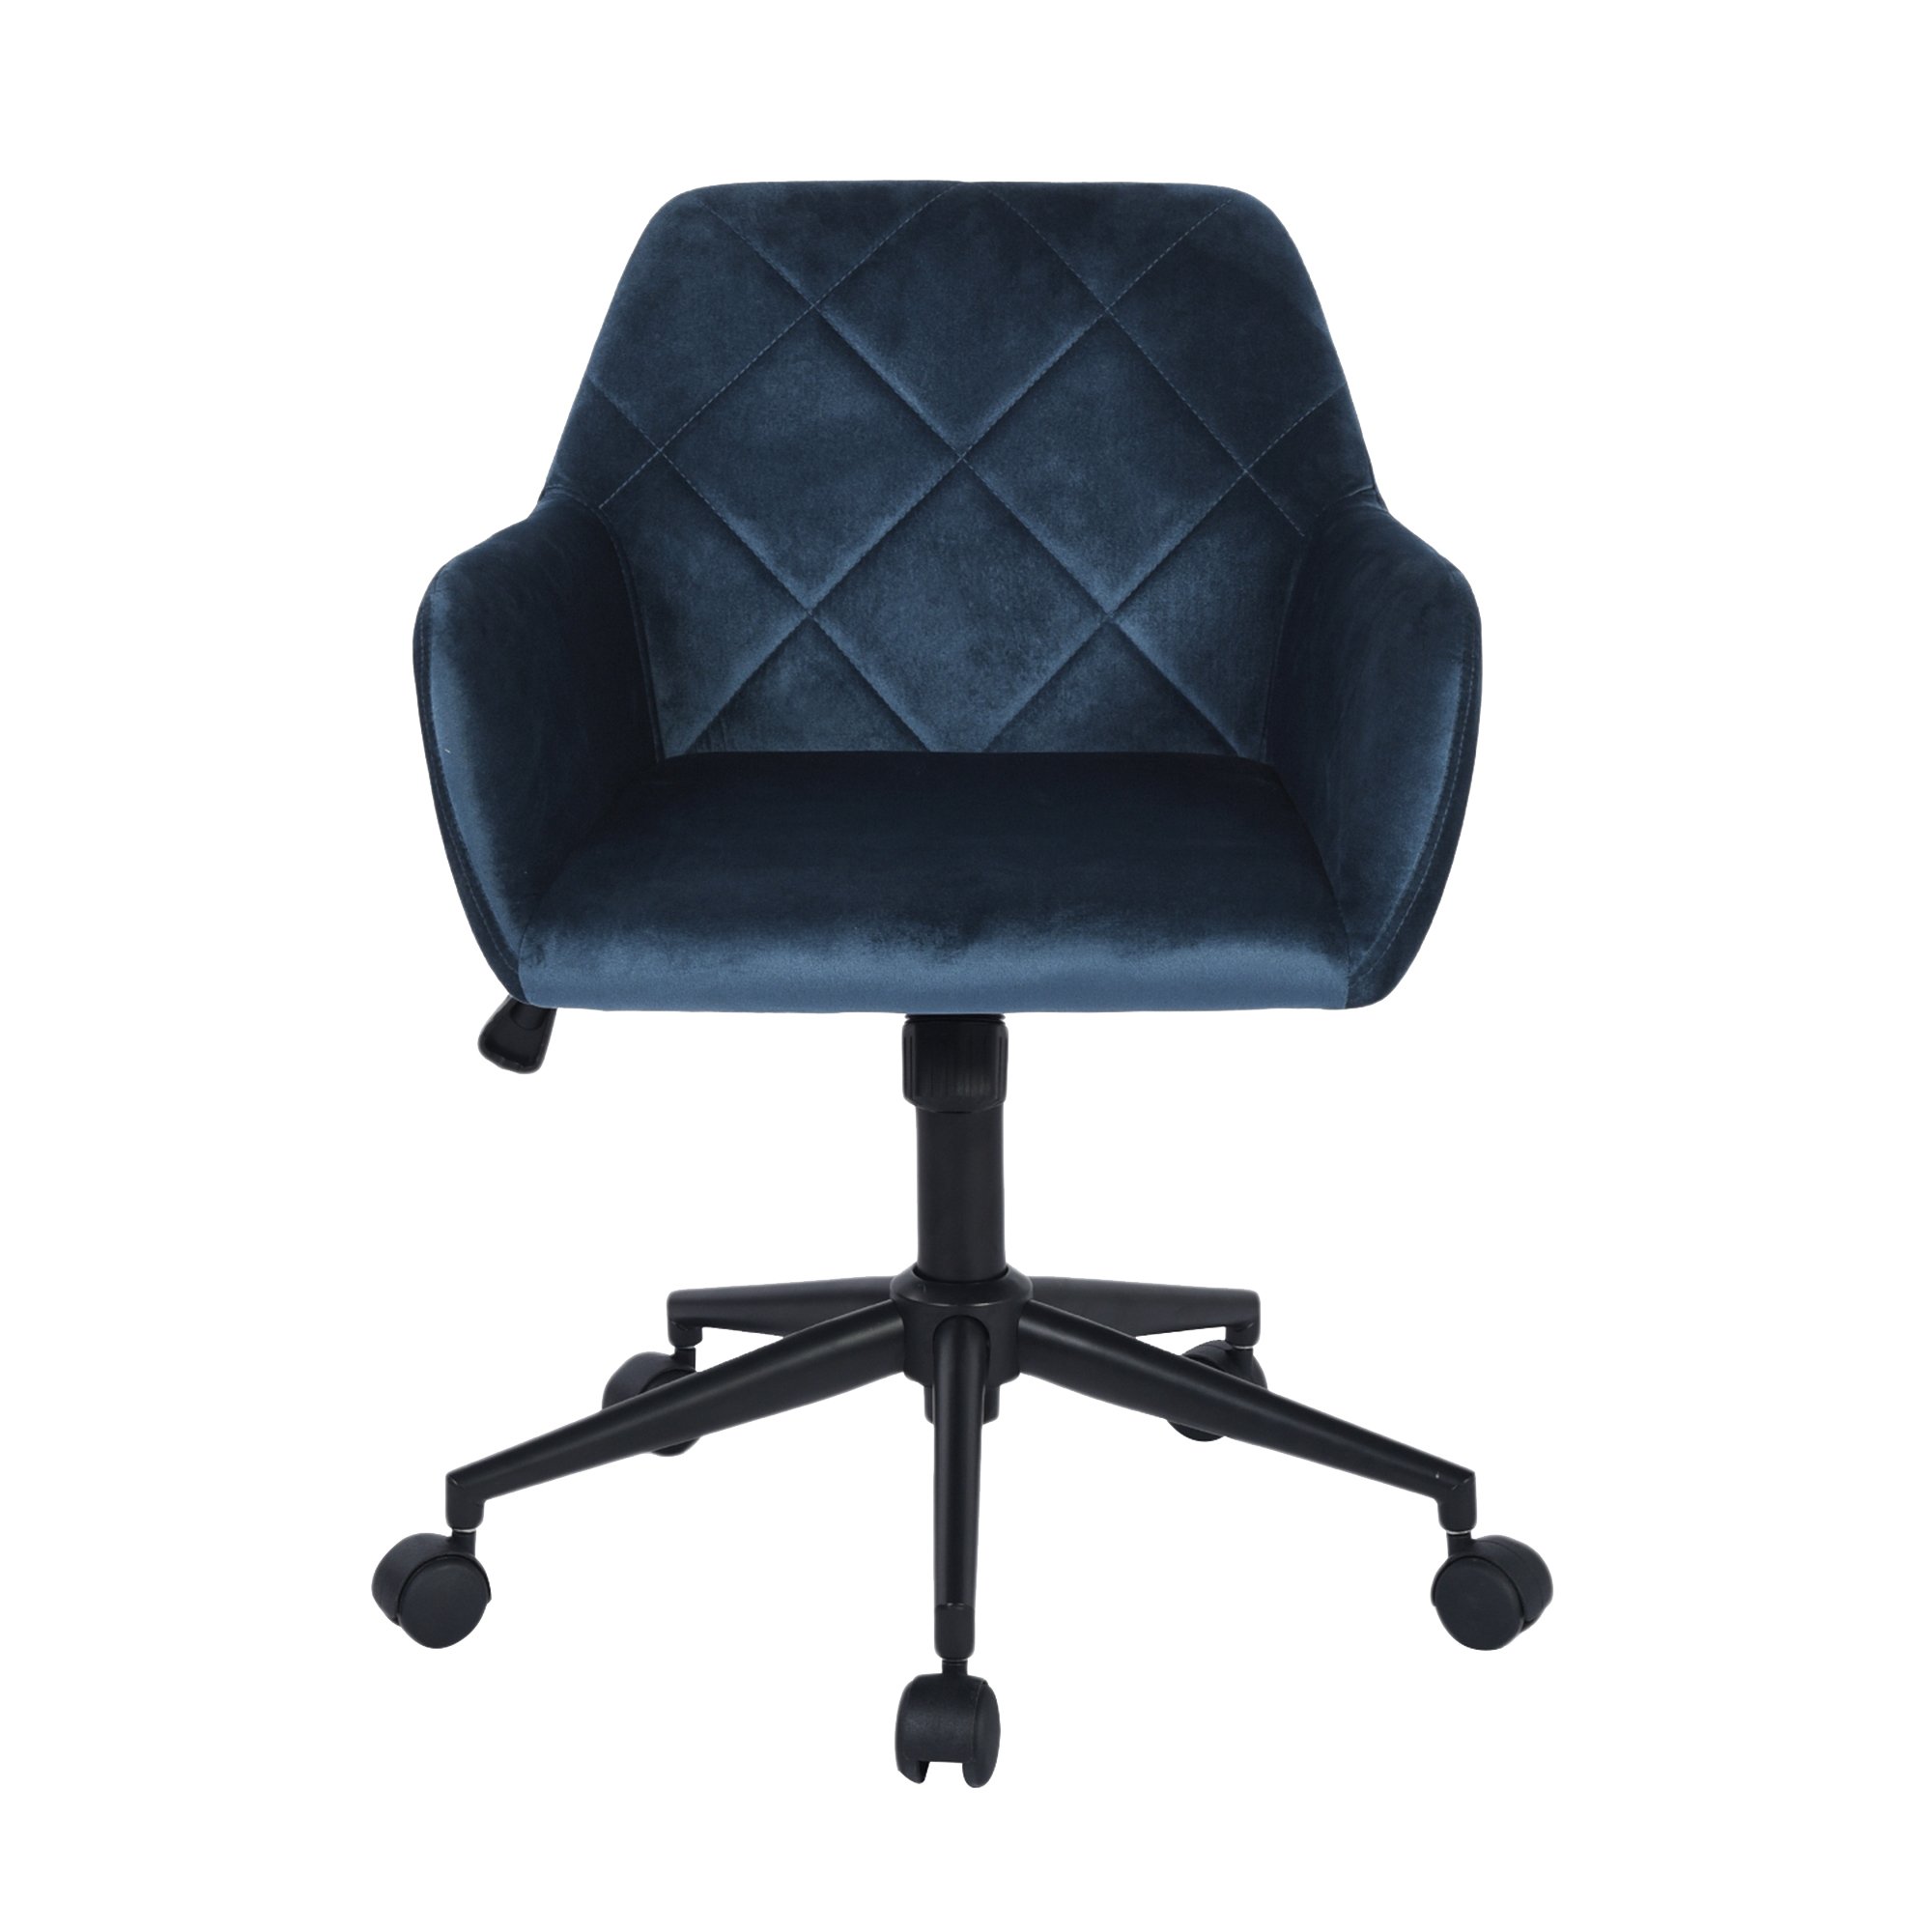 The Classic Chair with Padded Seat-CASAINC